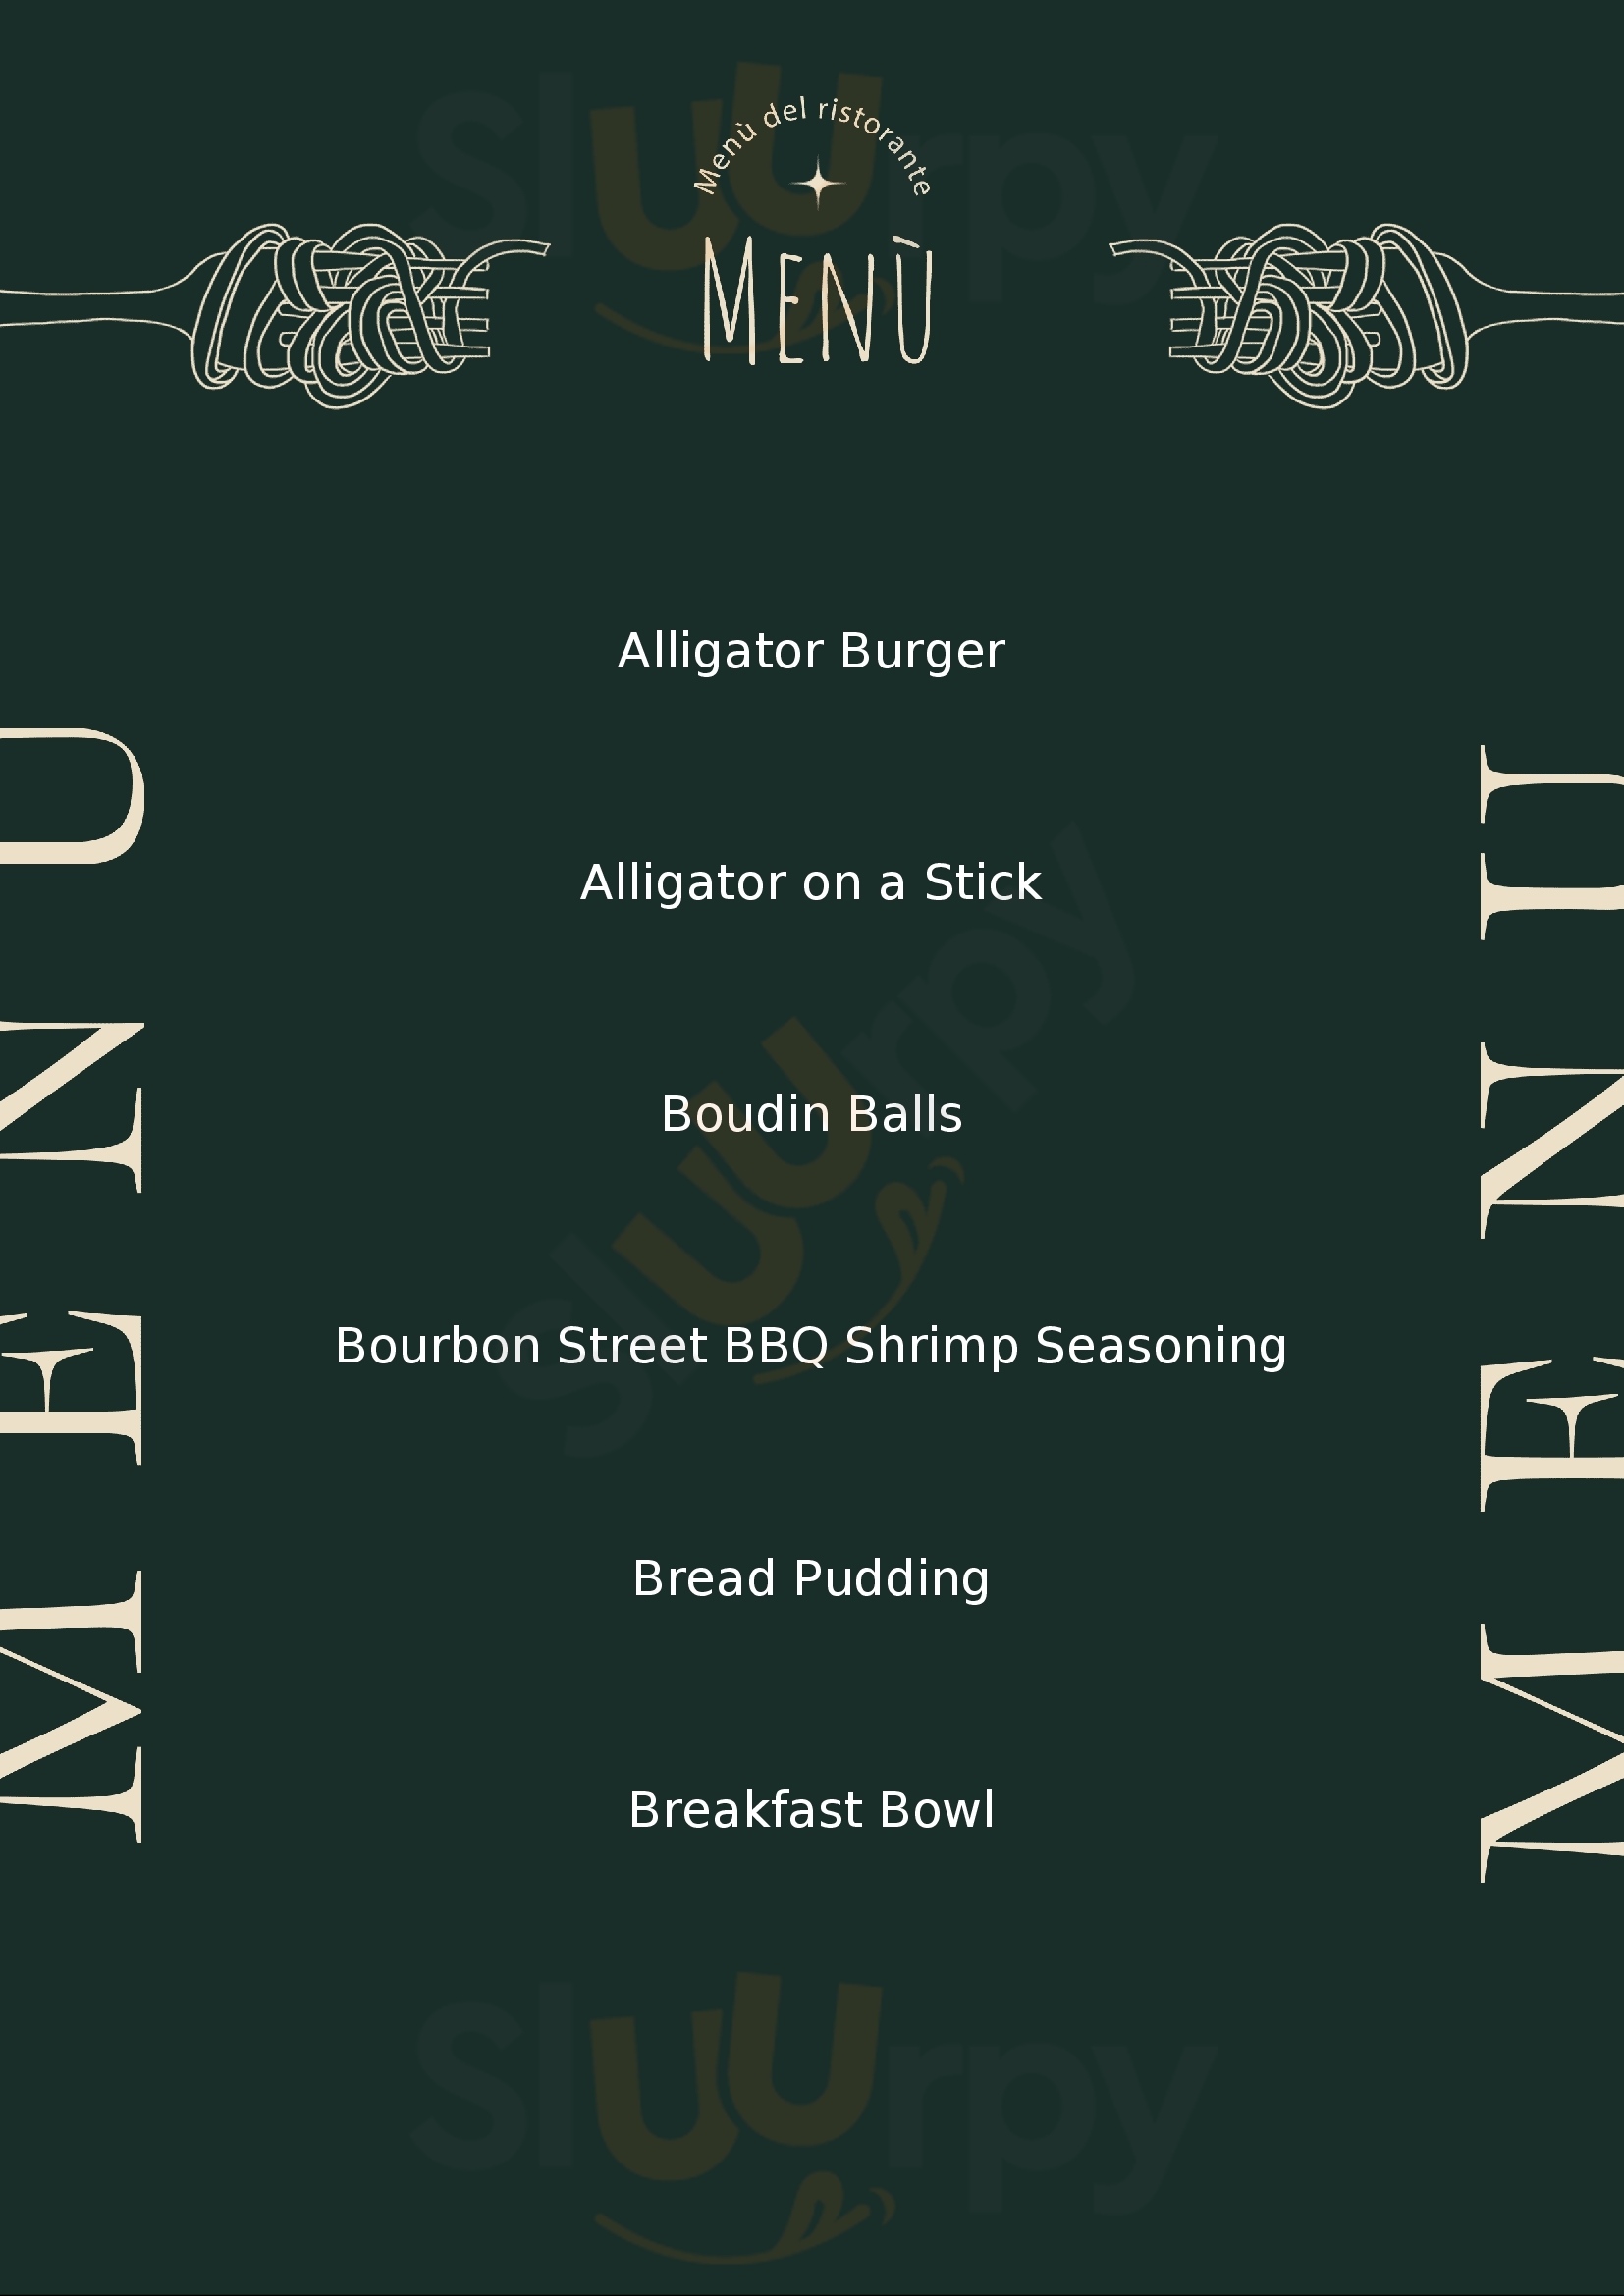 World Famous N'awlins Cafe' And Spice Emporium New Orleans Menu - 1